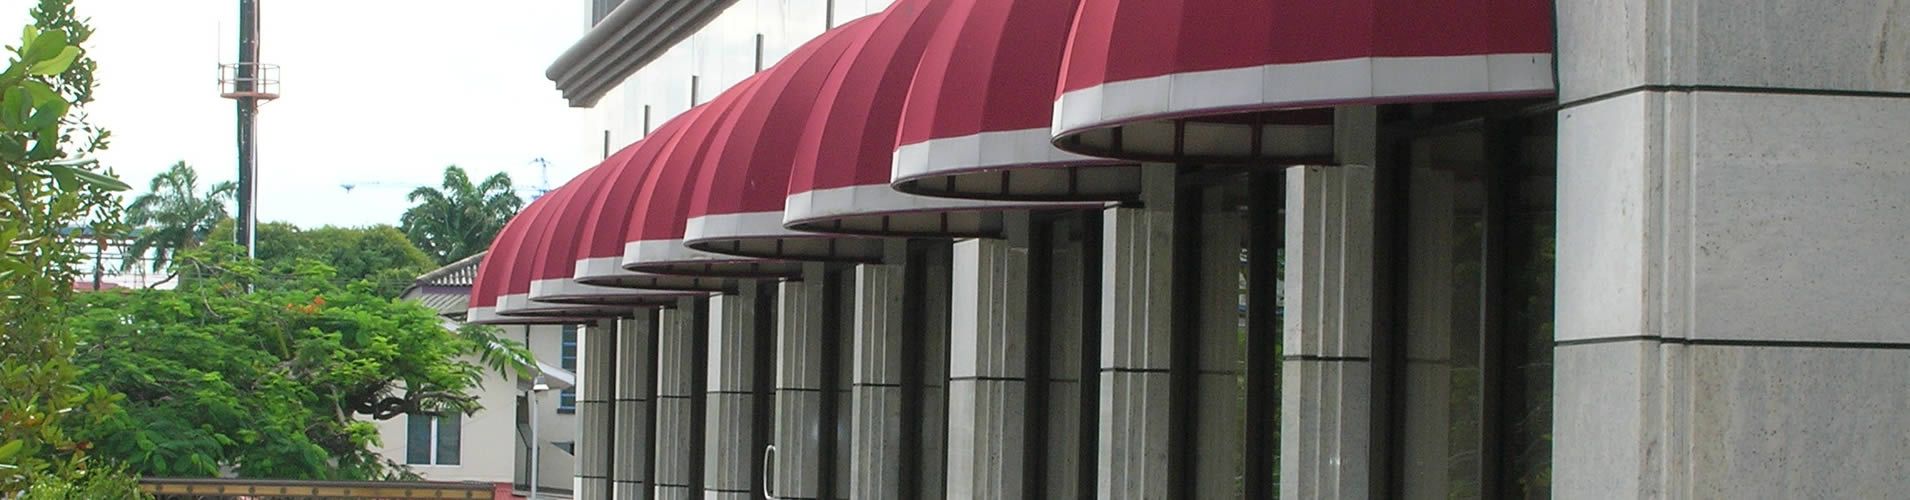 Commercial Awnings Palm Beach